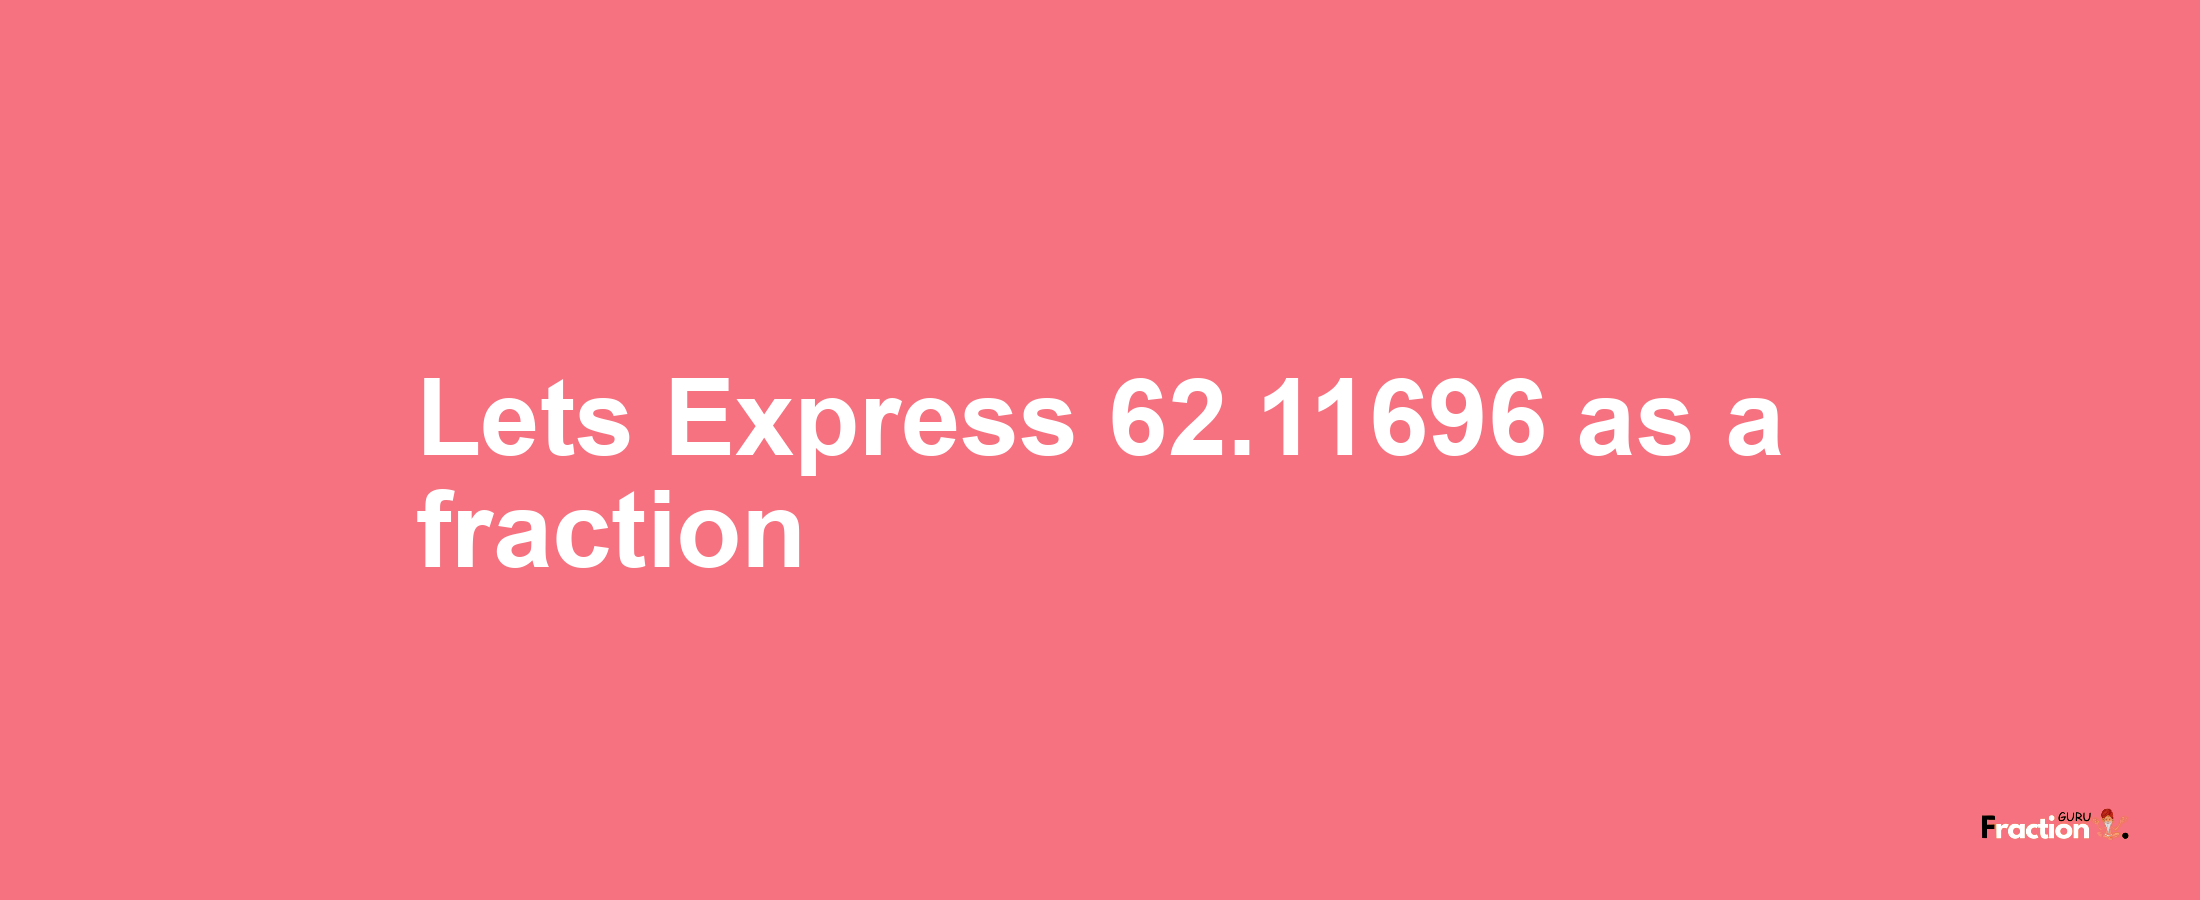 Lets Express 62.11696 as afraction